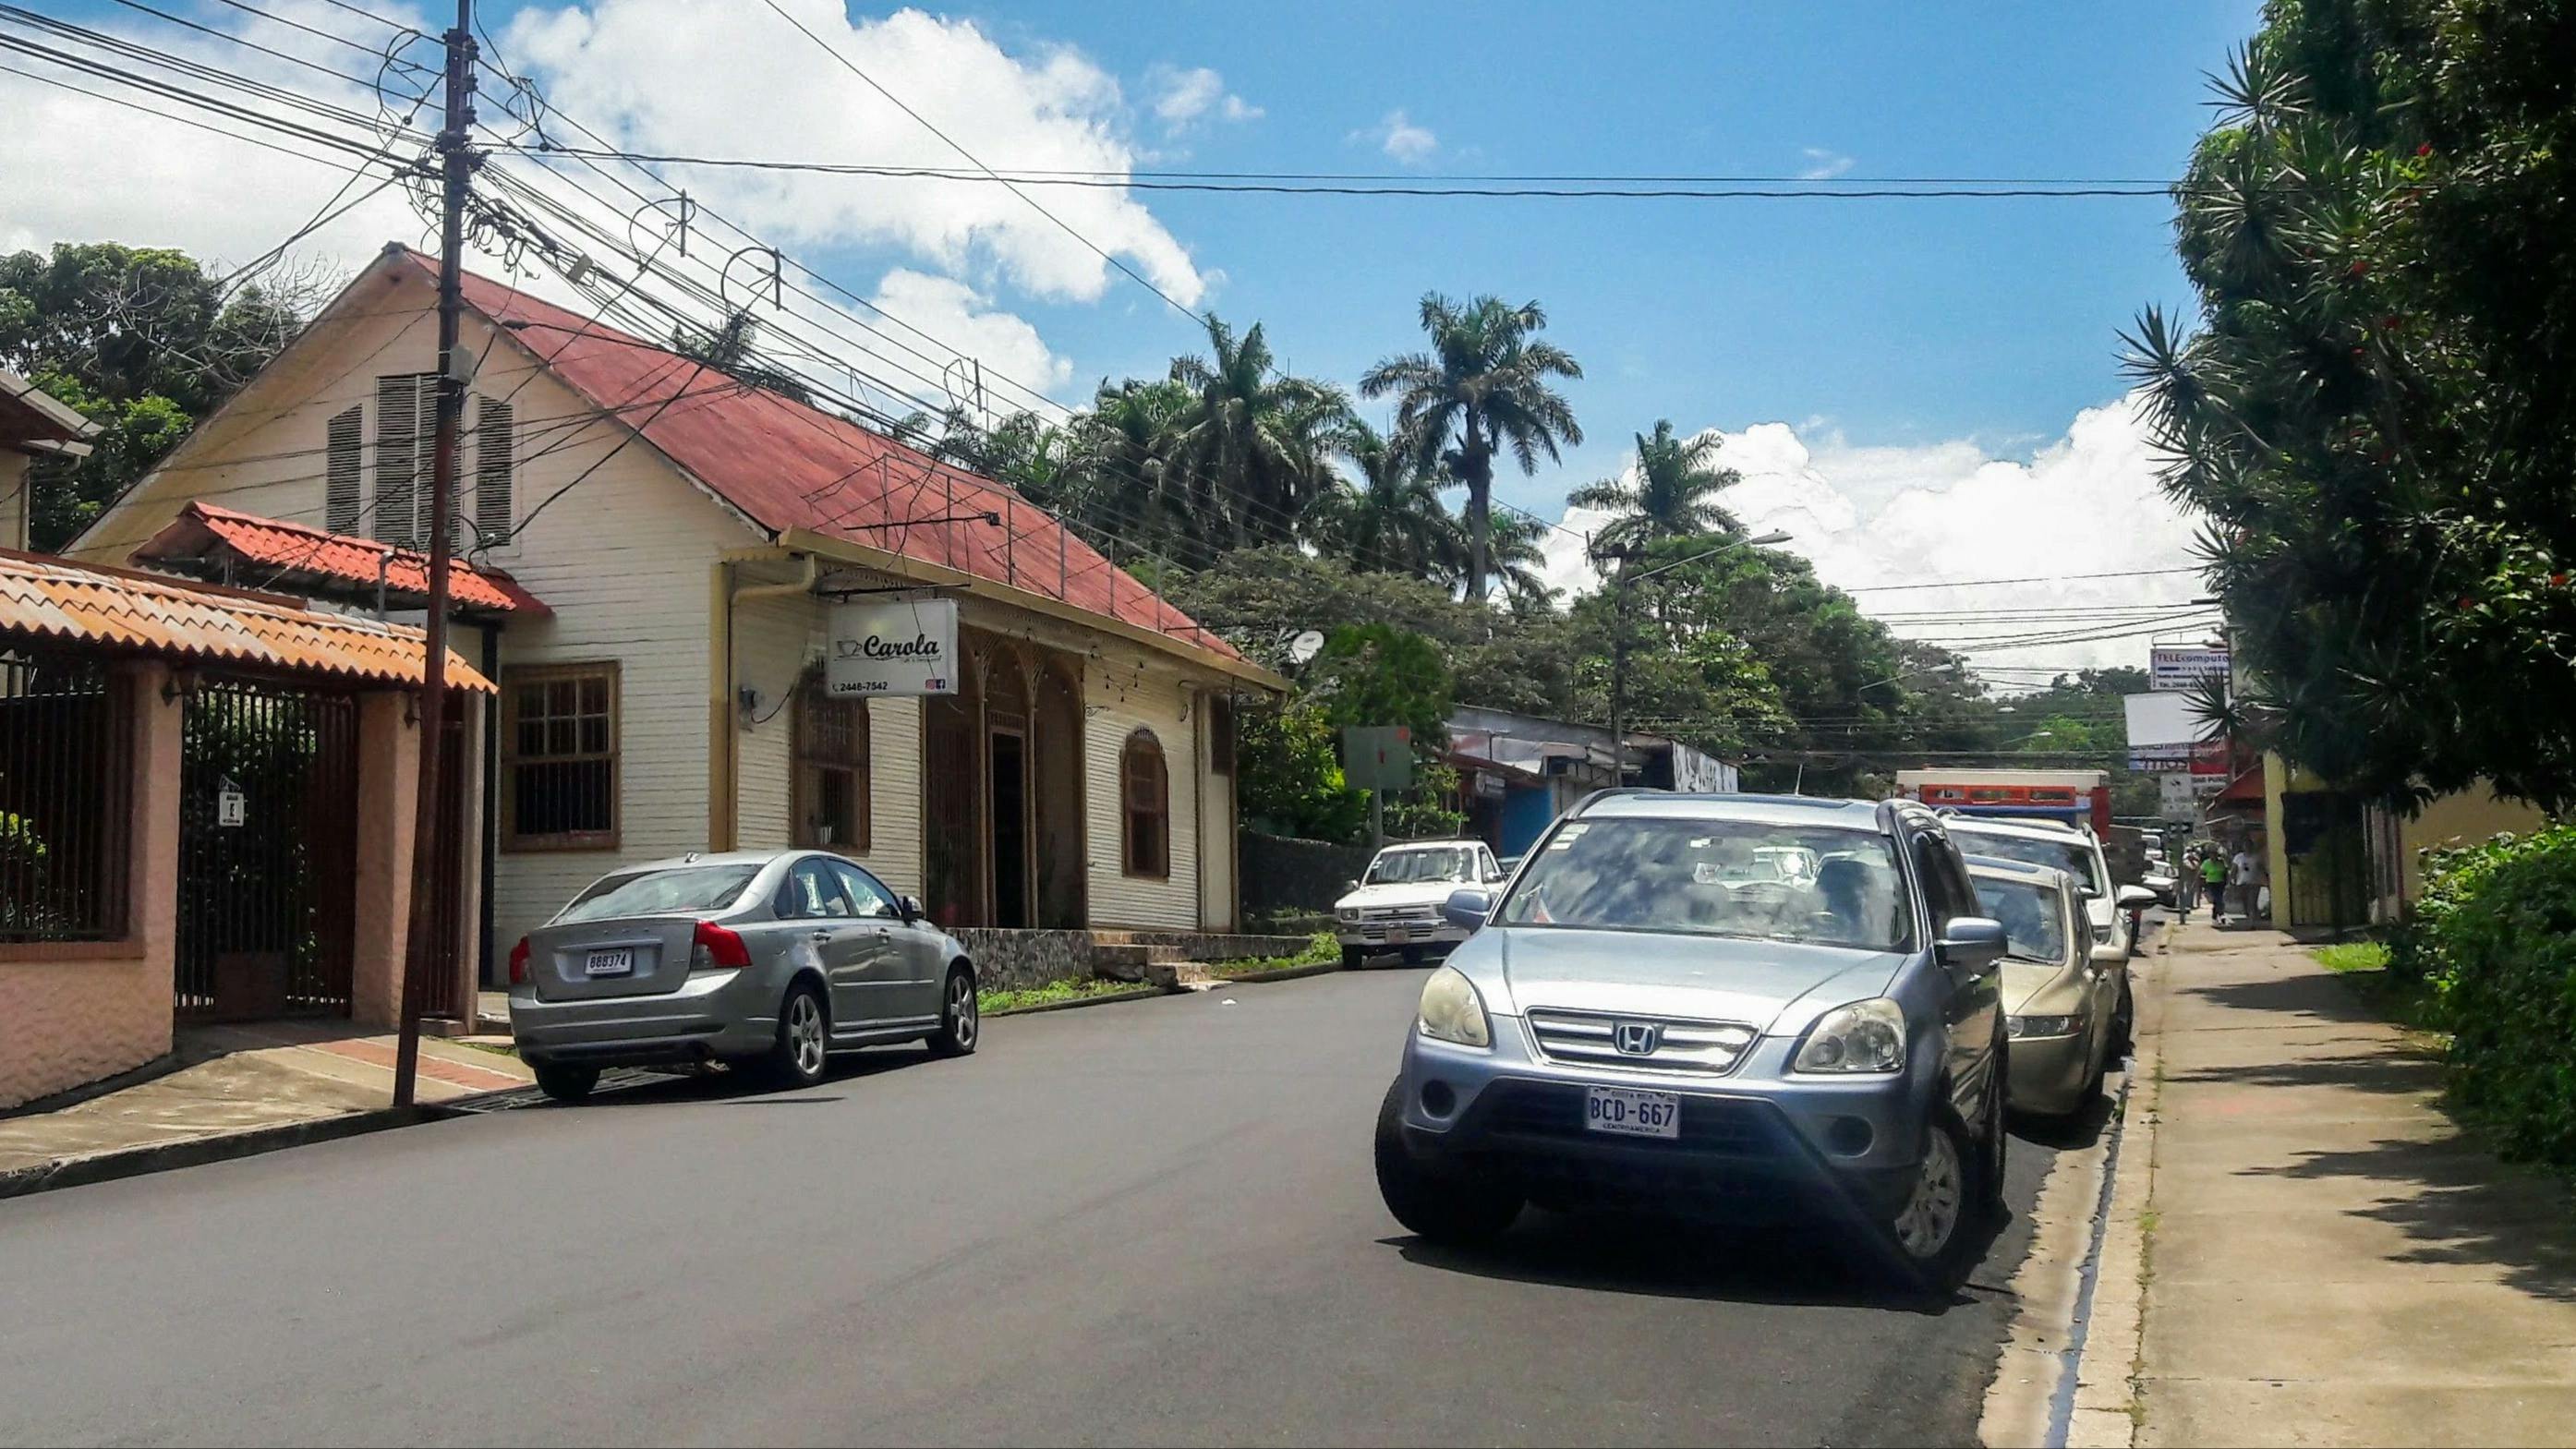 Cars on the street in Atenas, Costa Rica